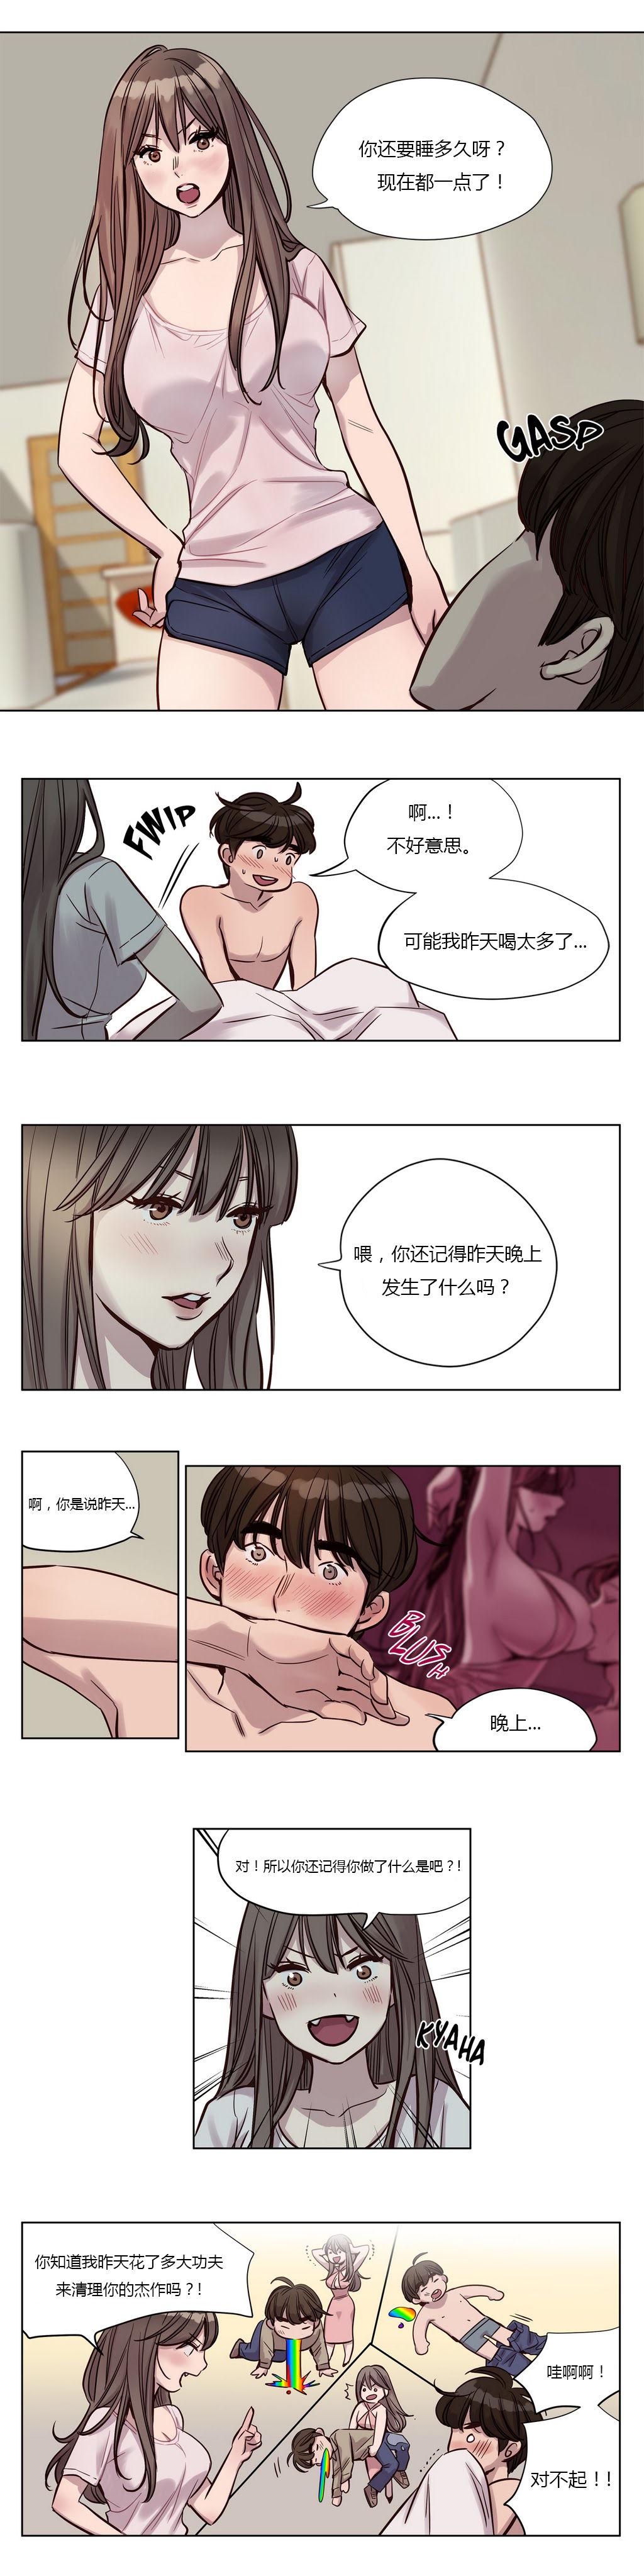 Chinese Atonement Camp Ch.21-23 Mediumtits - Page 9